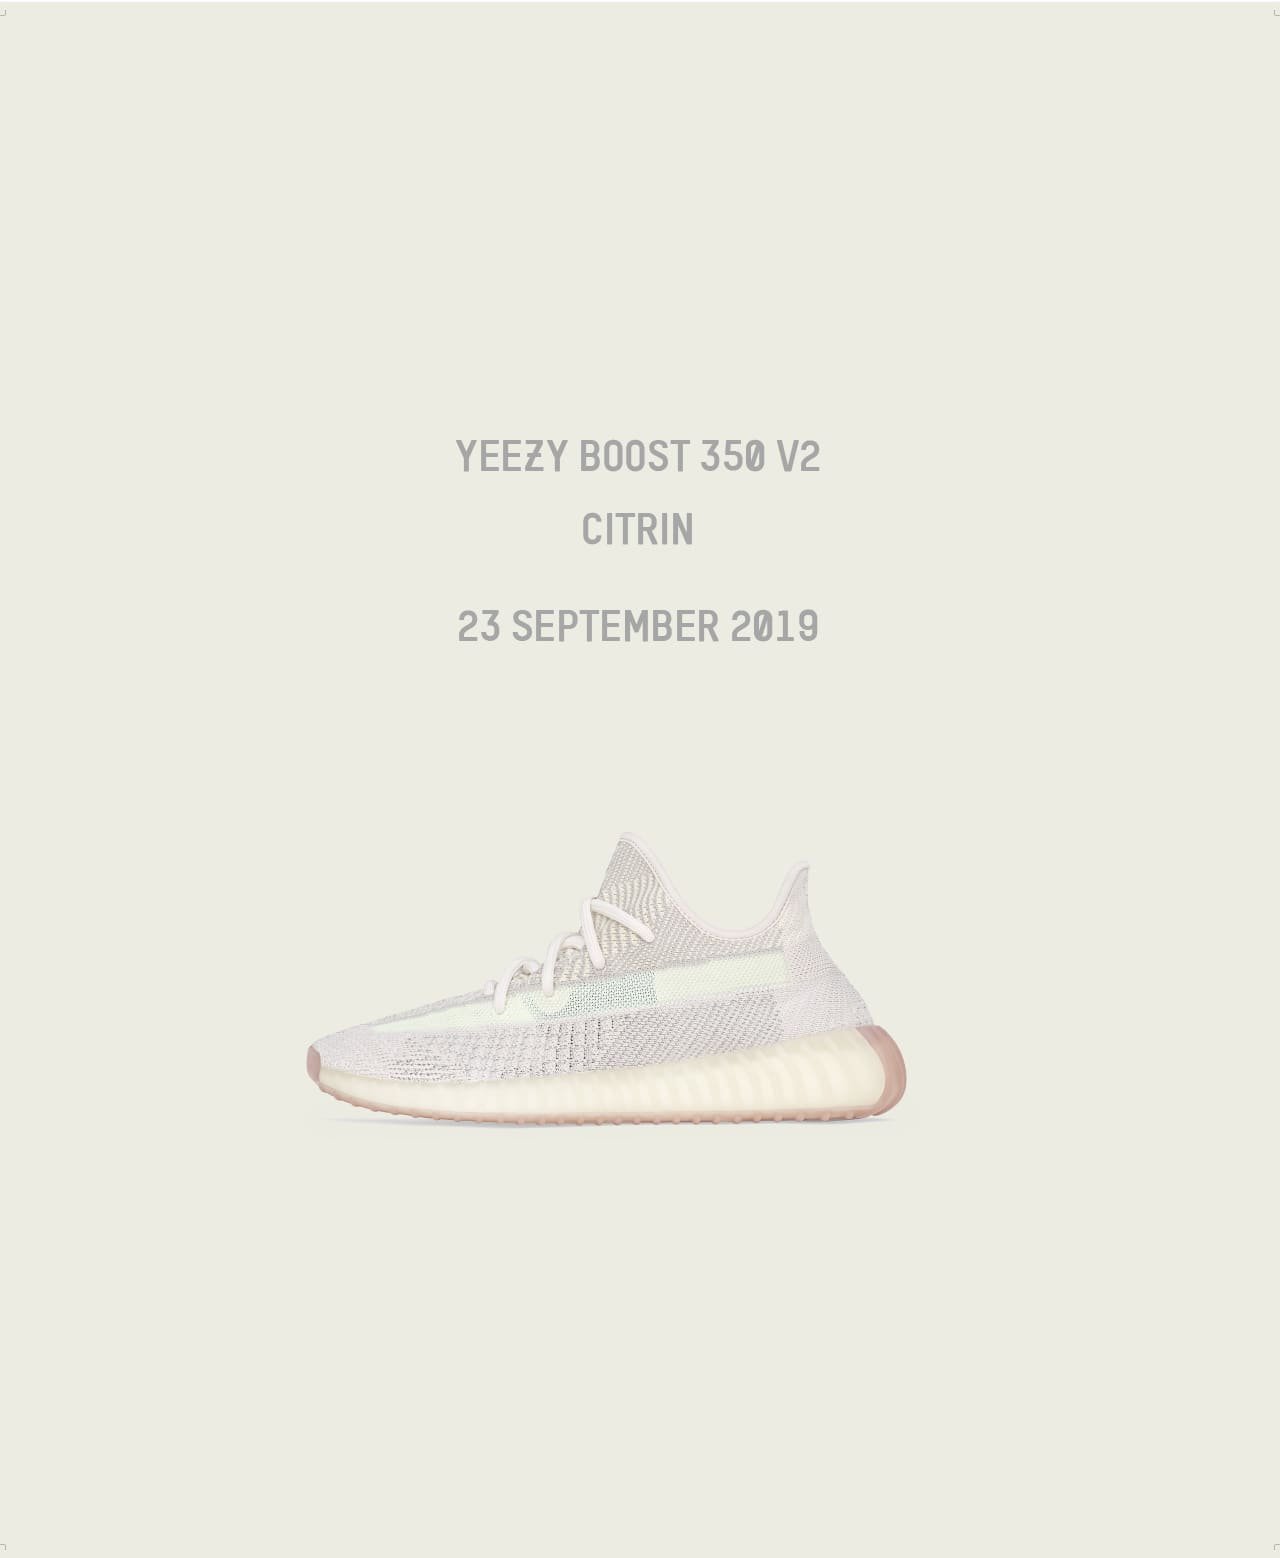 Yeezy Boost 350 V2 Citrin. Coming Soon 